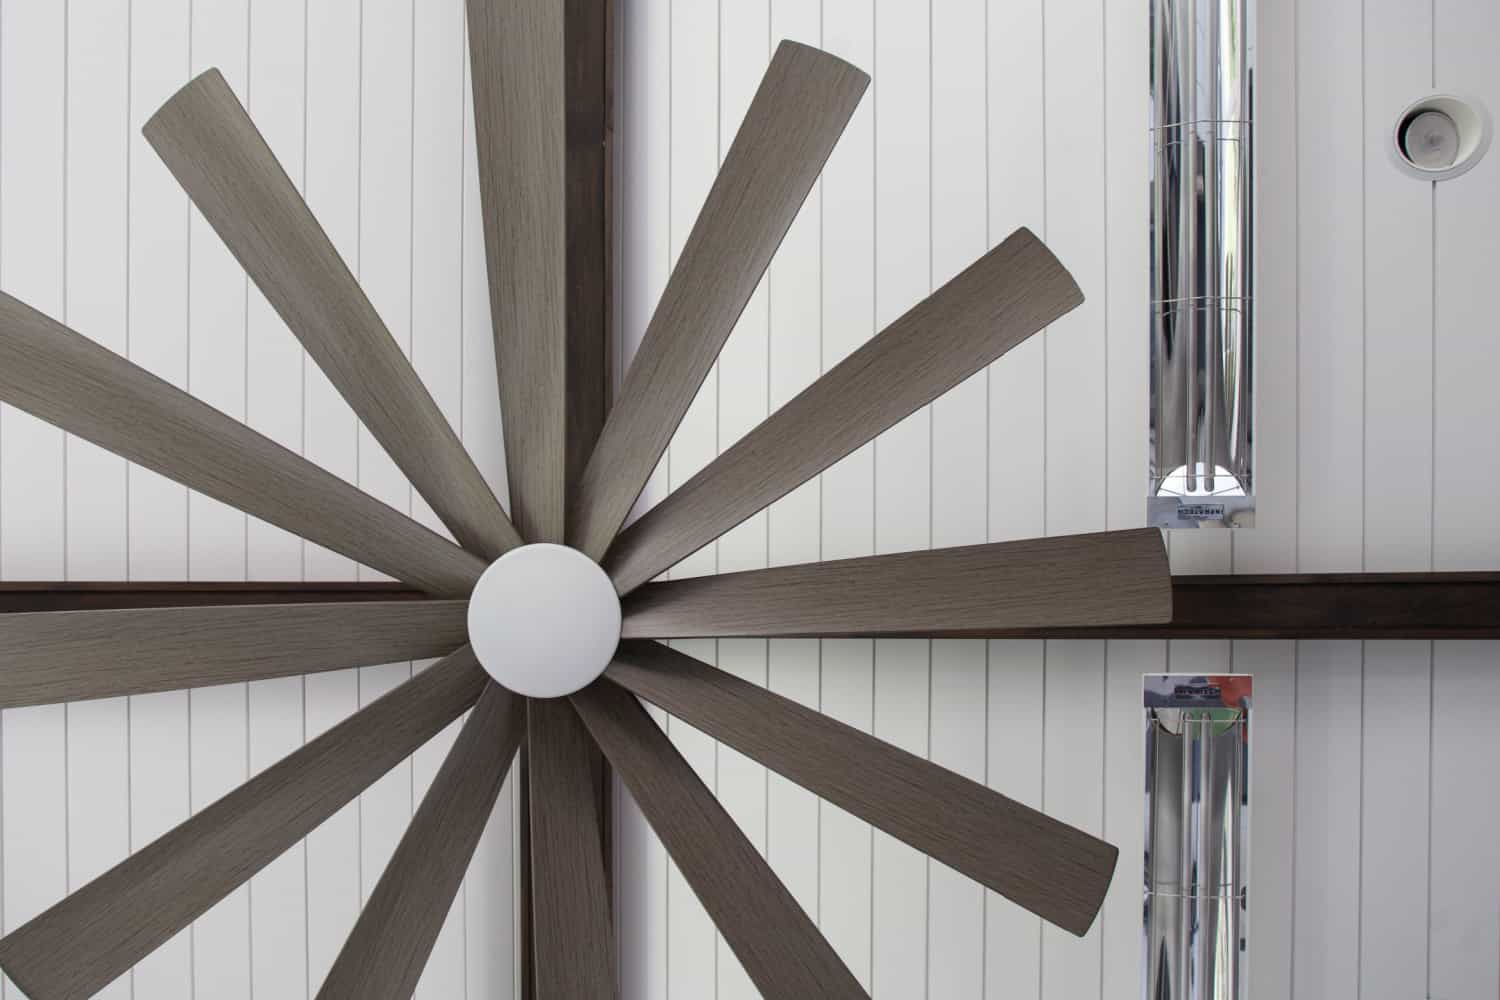 Nicholas Design Build | A large wooden fan on the wall of a room.